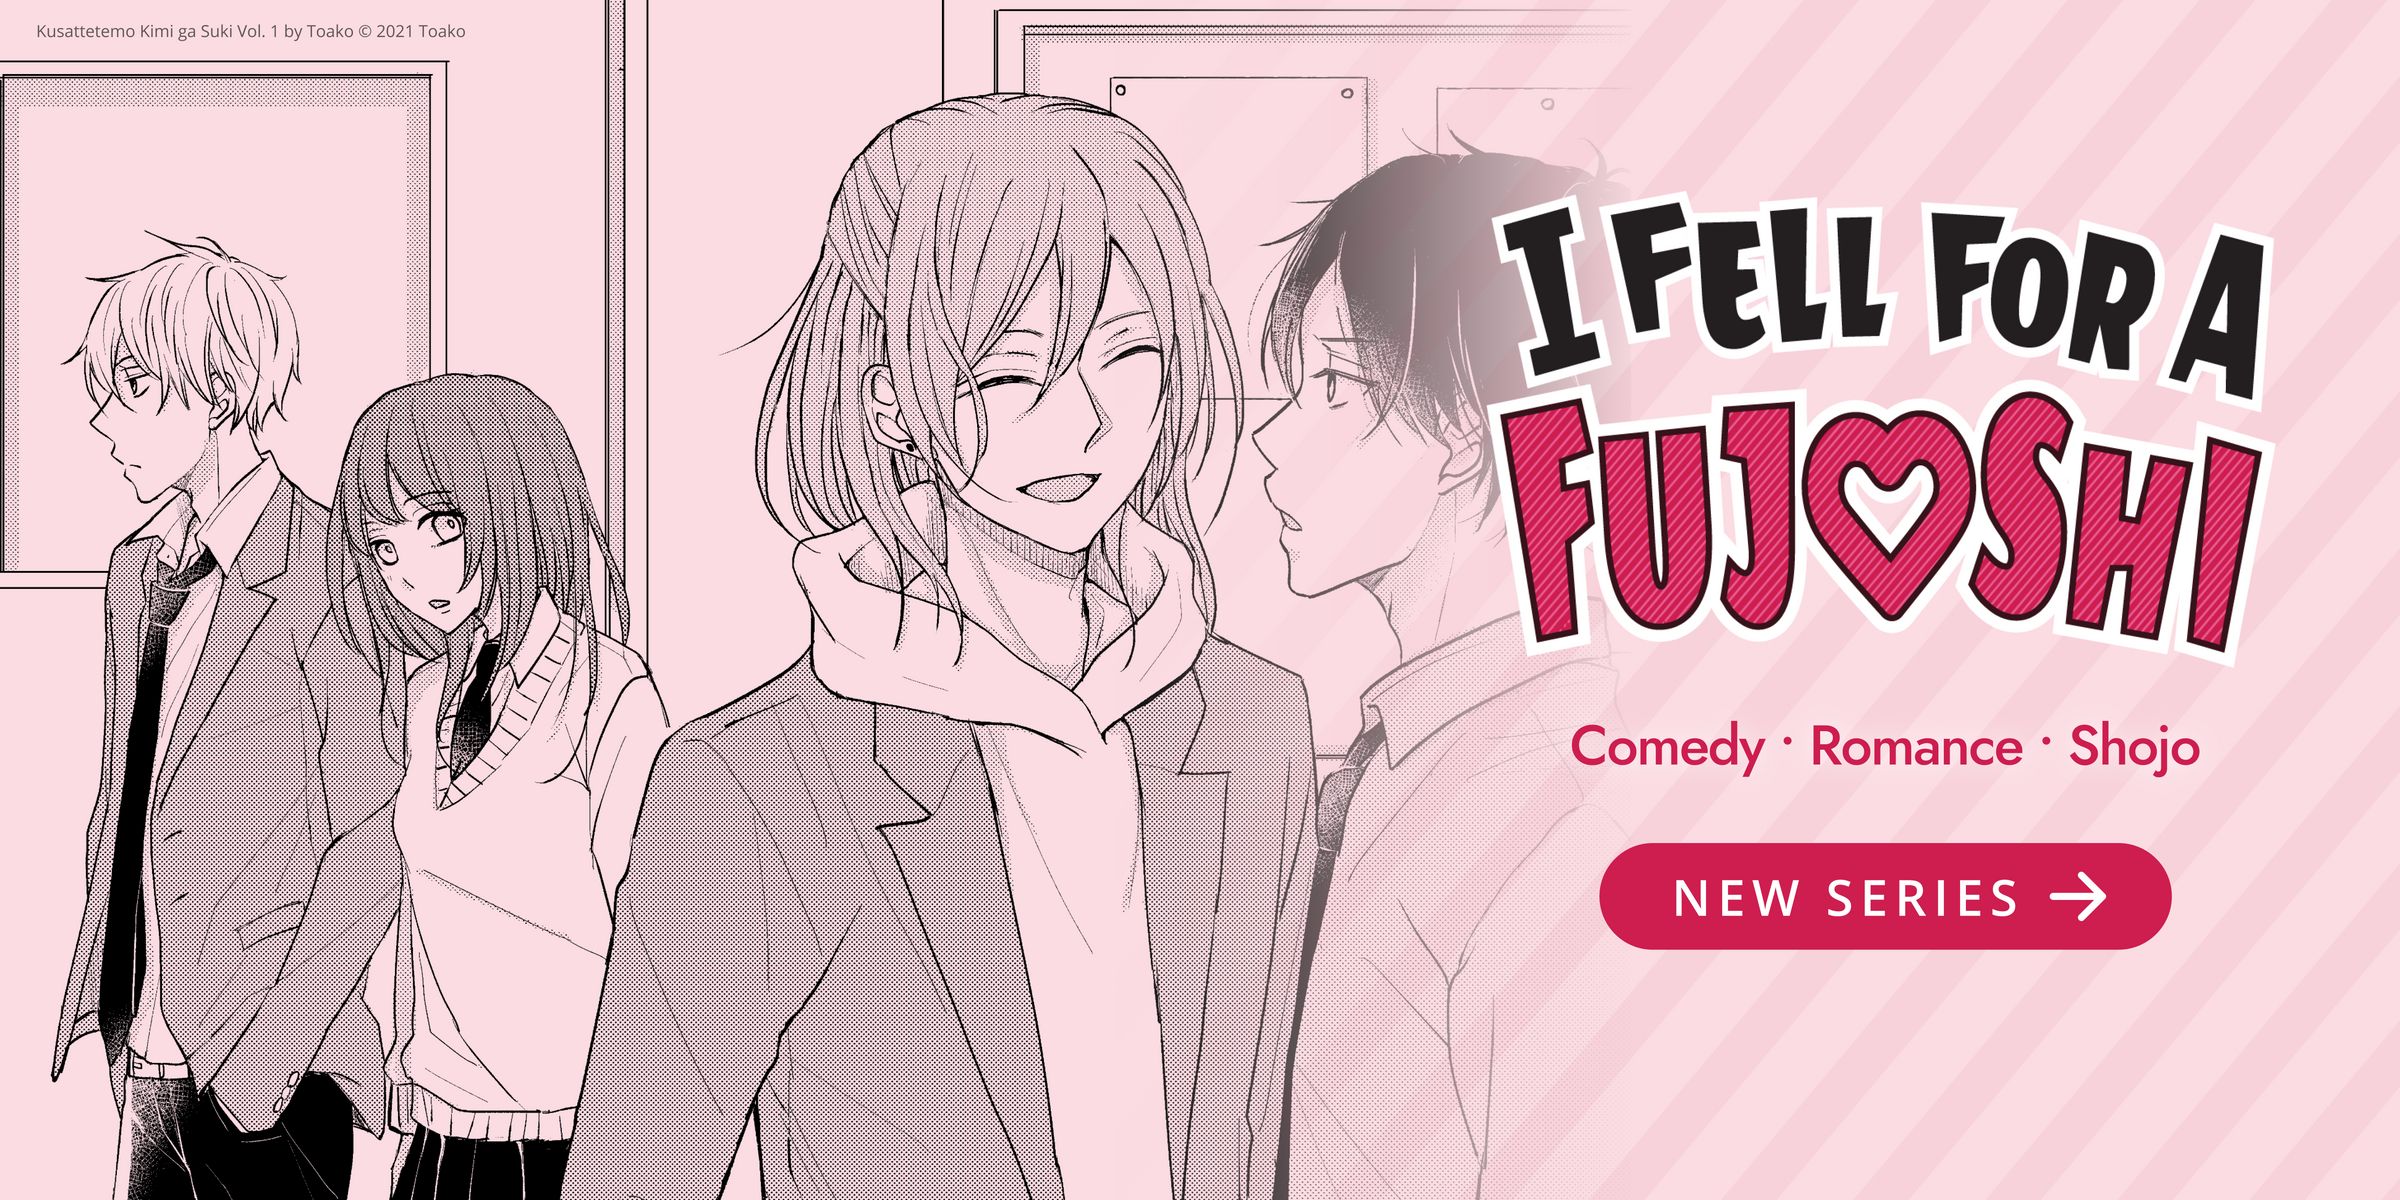 A high school boy and girl walking down the hallway while the girl ogles two boys talking. I Fell for a Fujoshi. Comedy, romance, shojo. New series.